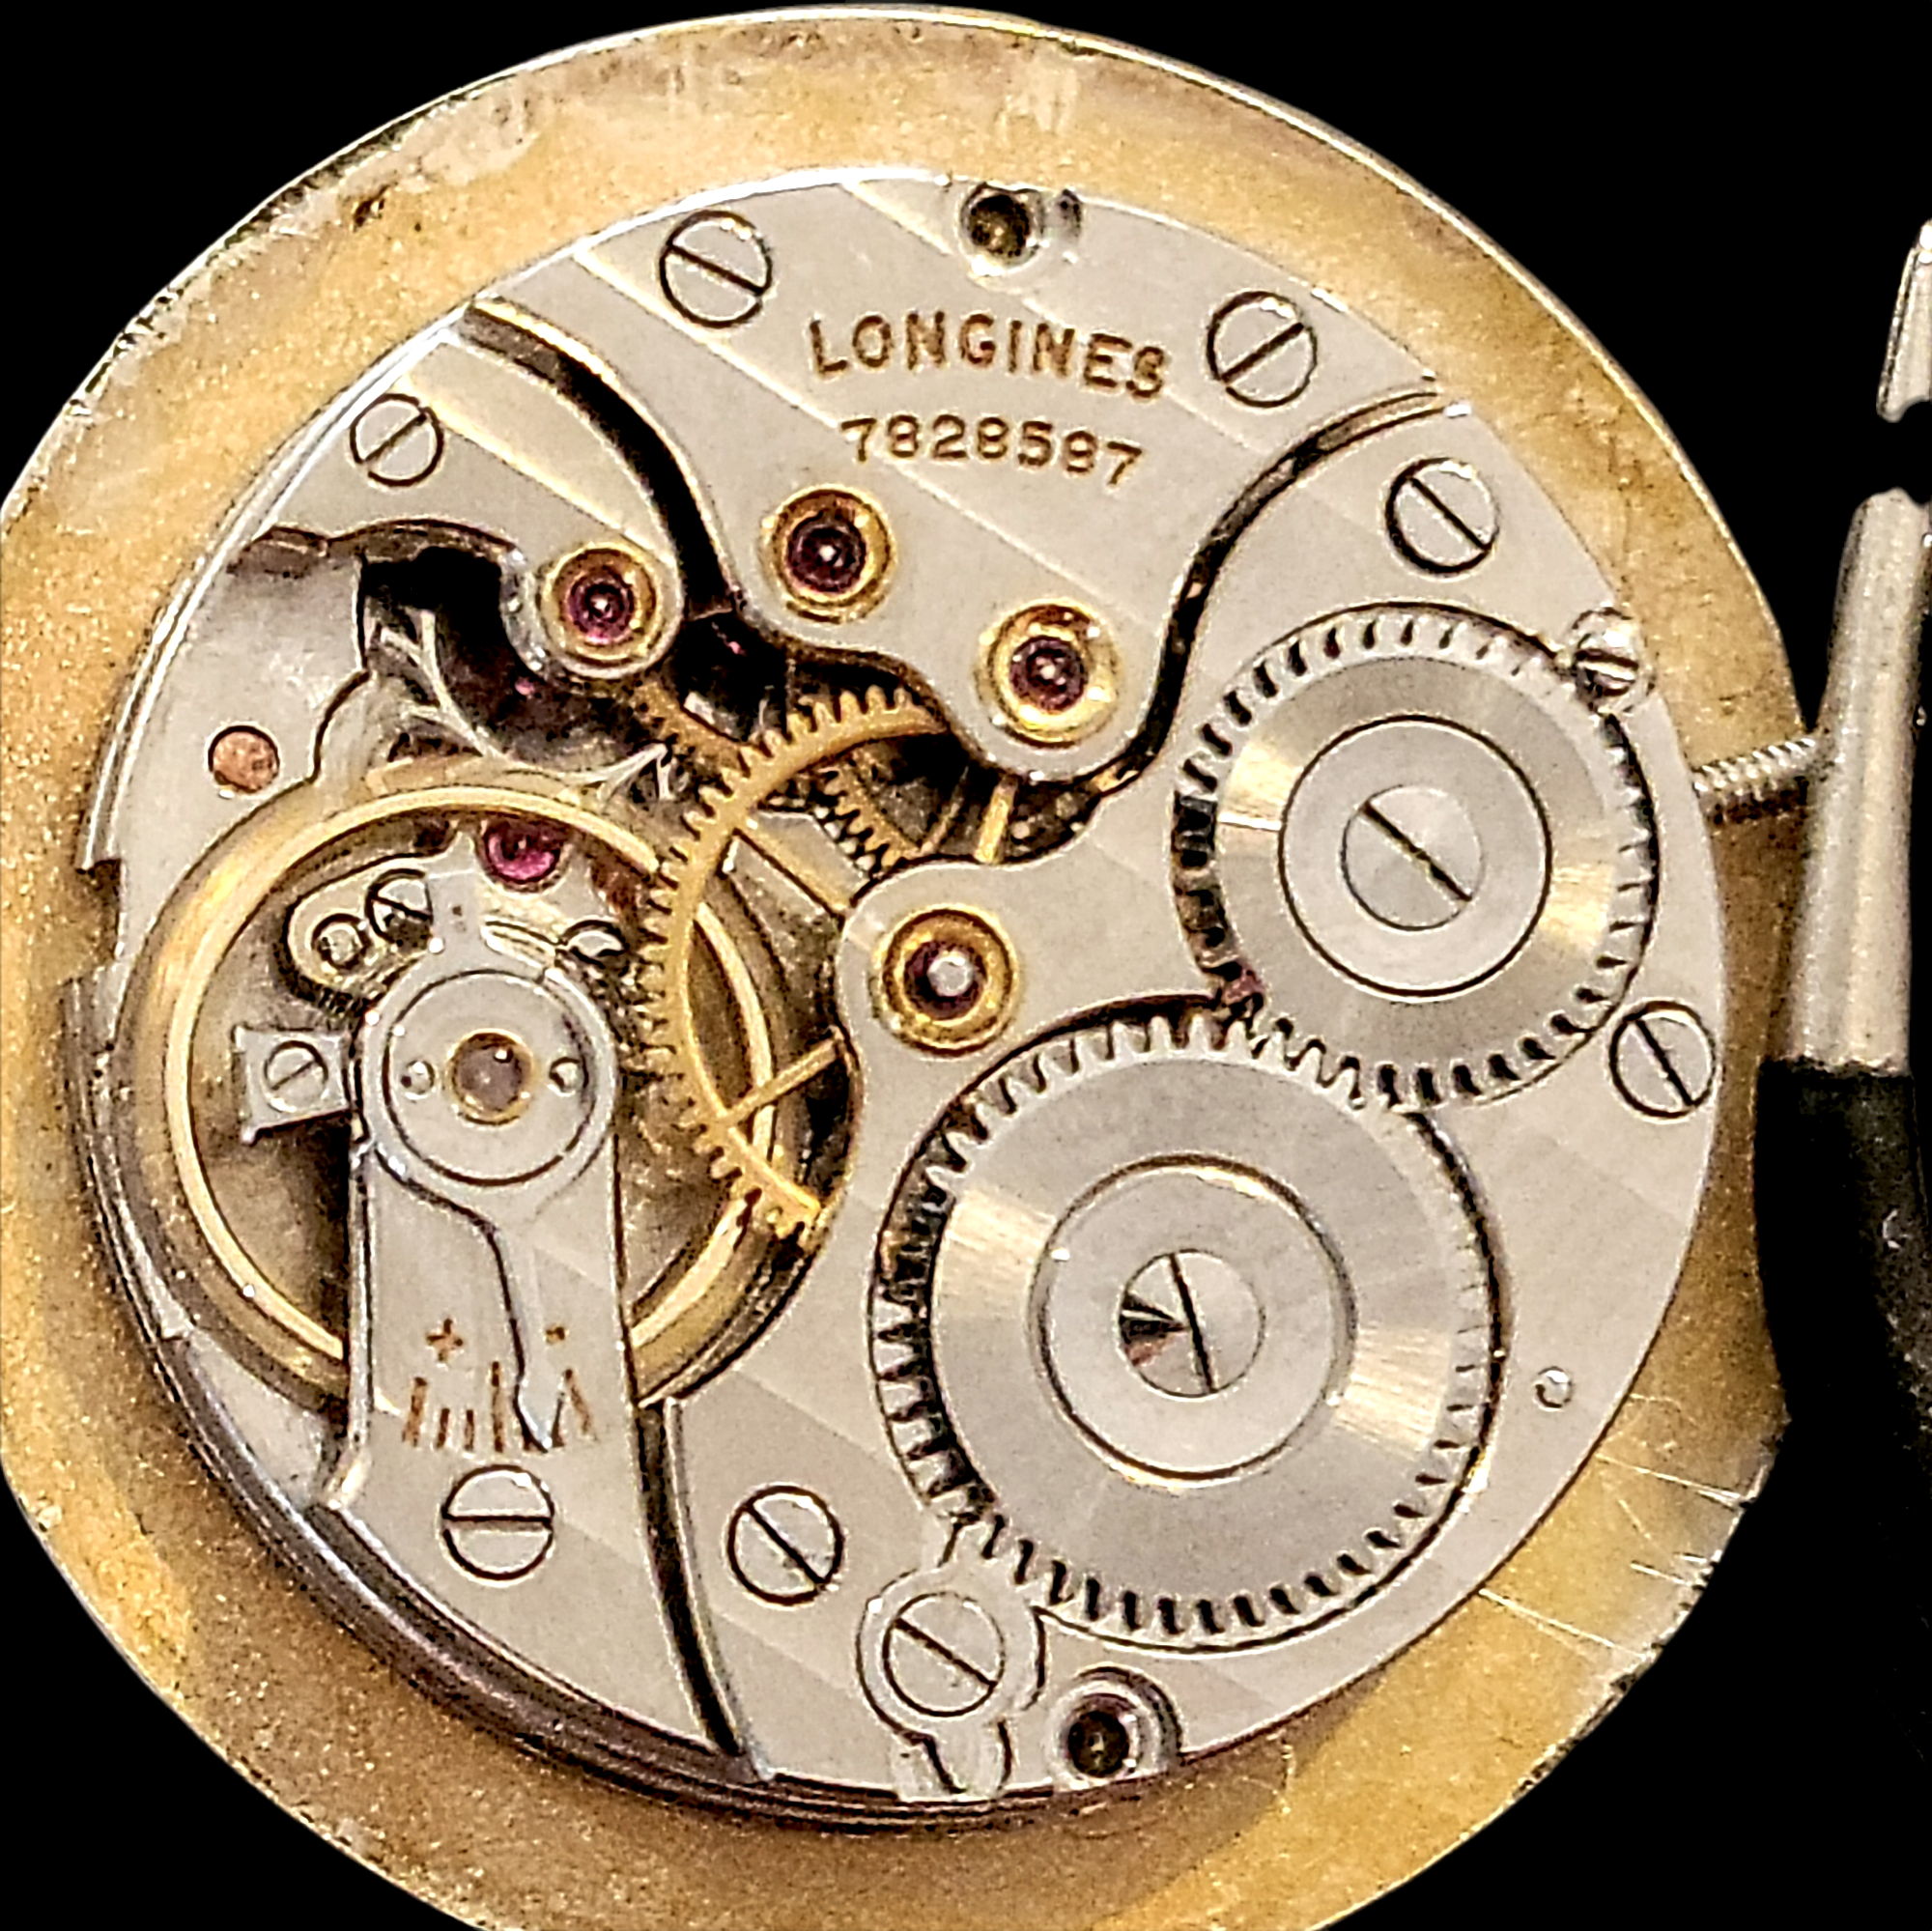 LONGINES 18K Solid Gold Watch